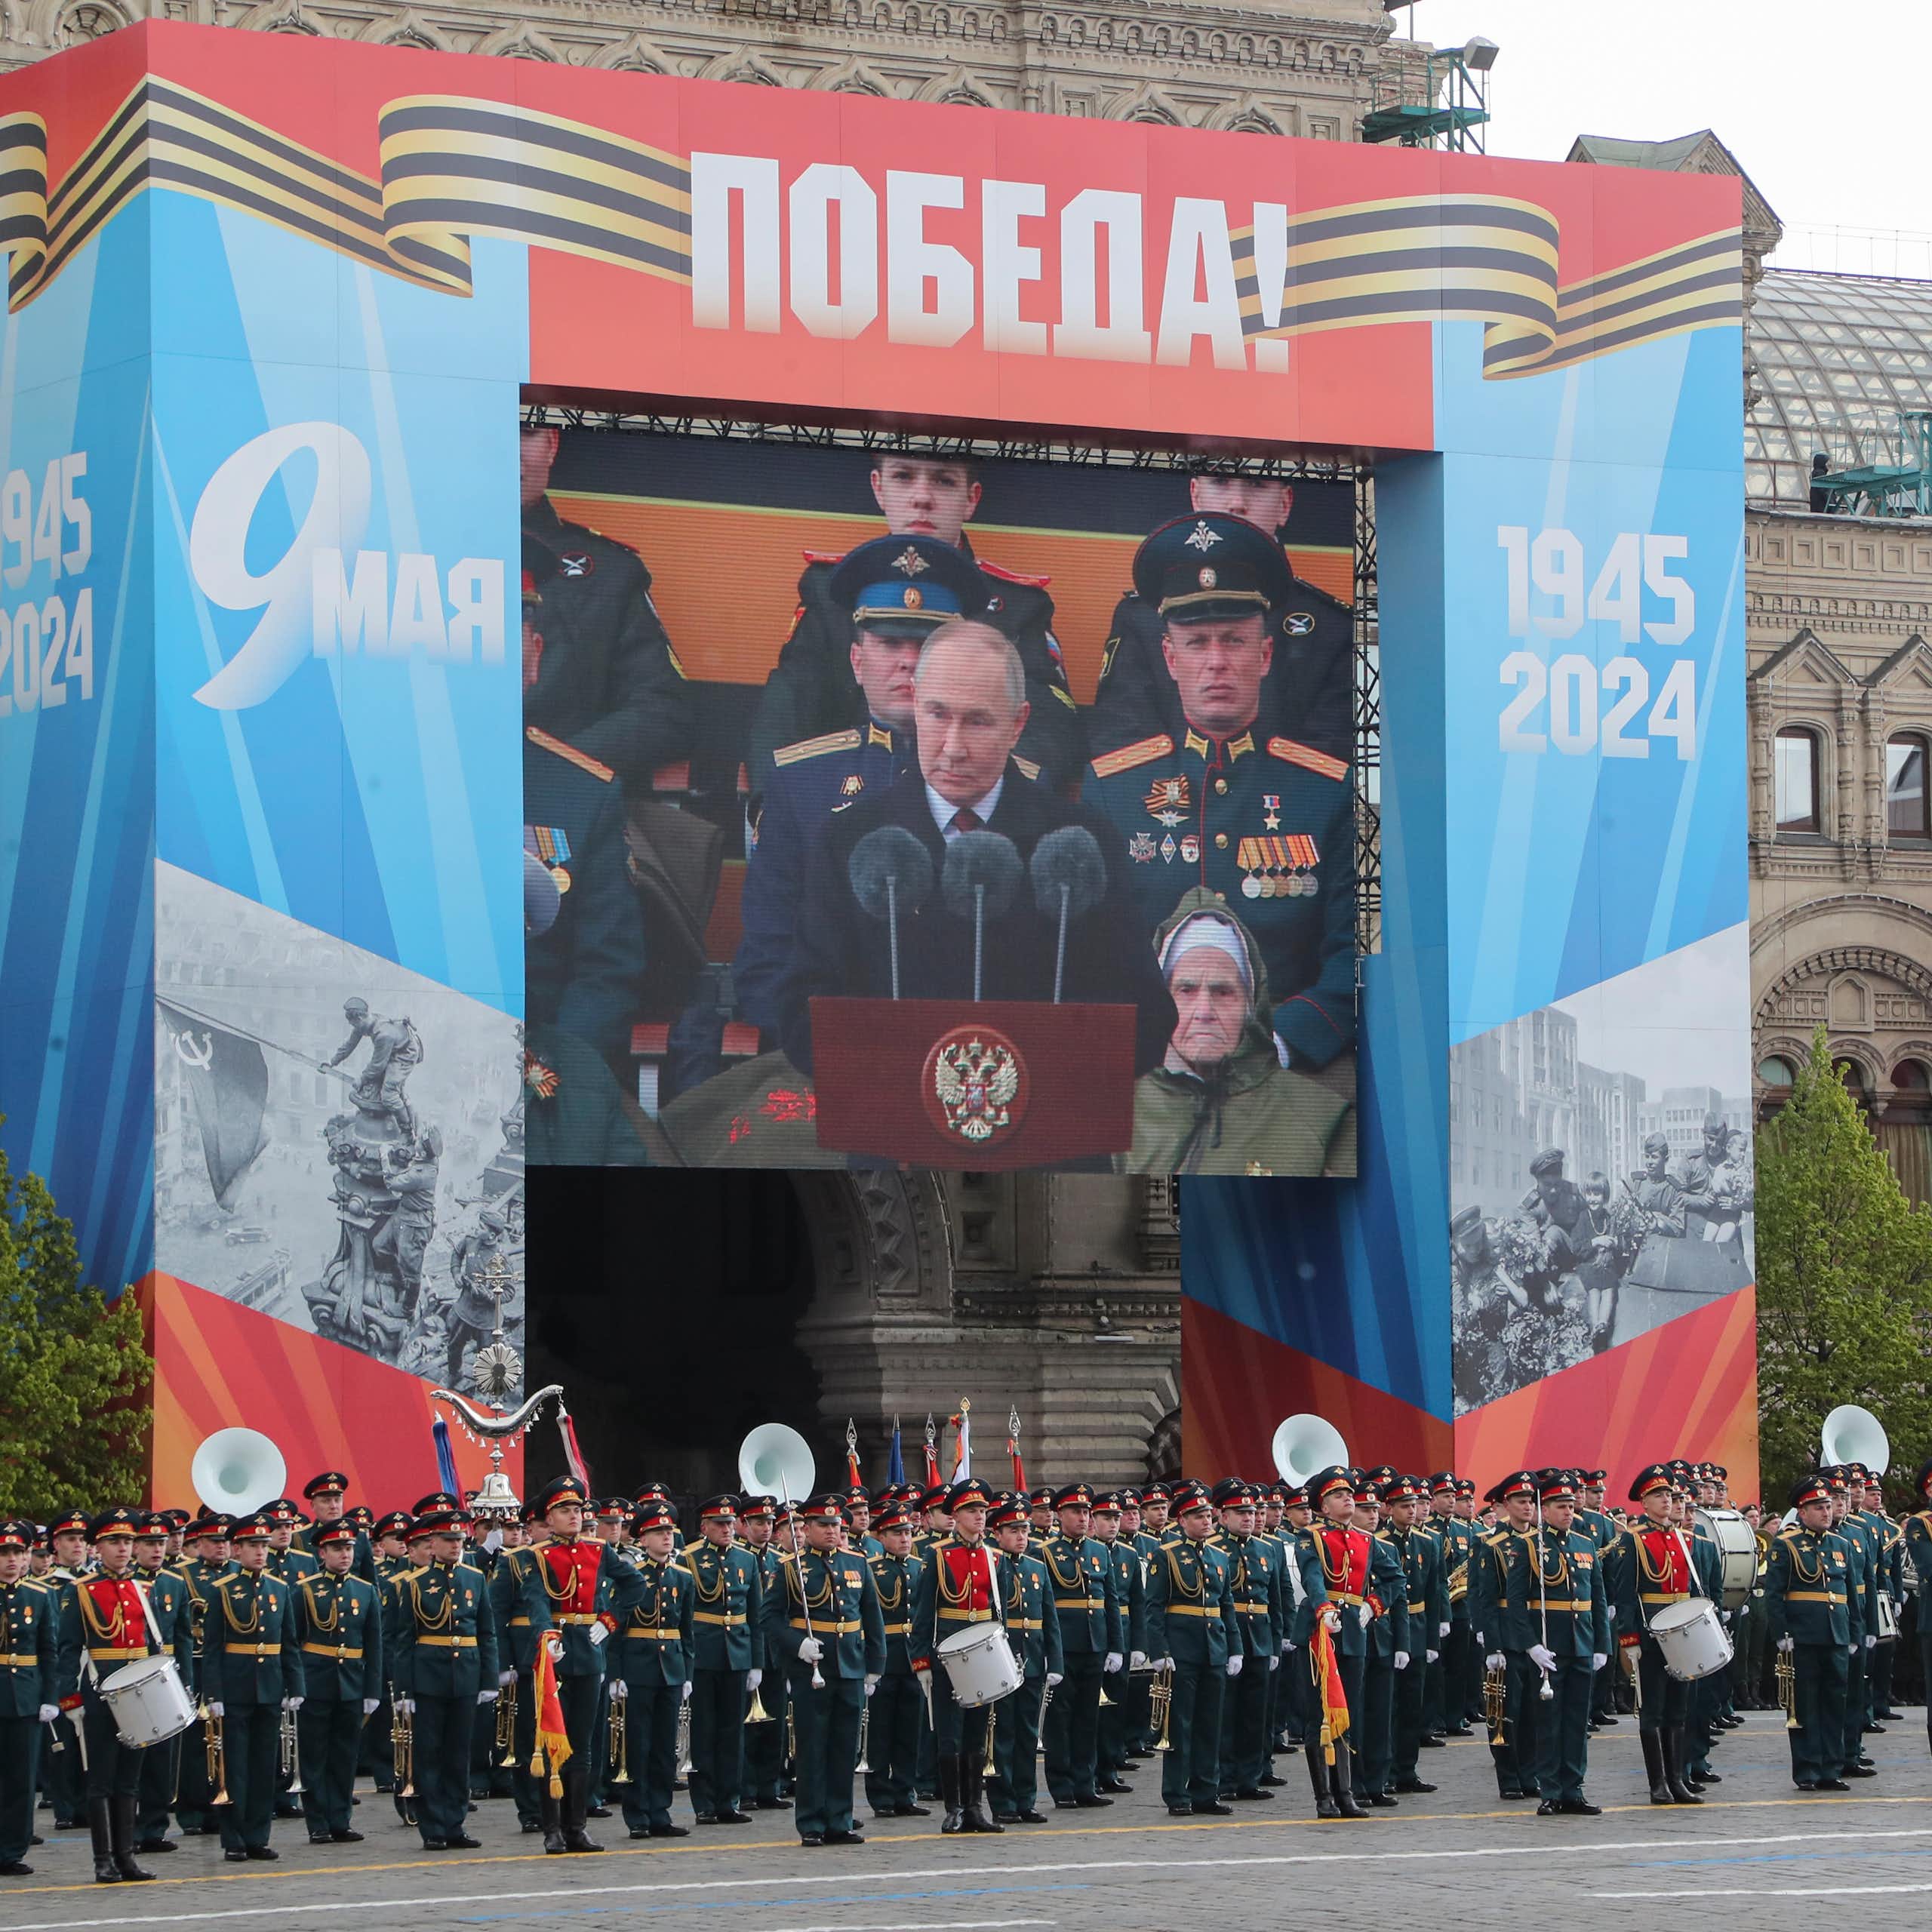 Vladimir Putin delivers his Victory Day speech via video screen in Red Square, Moscow, on May 9 2024